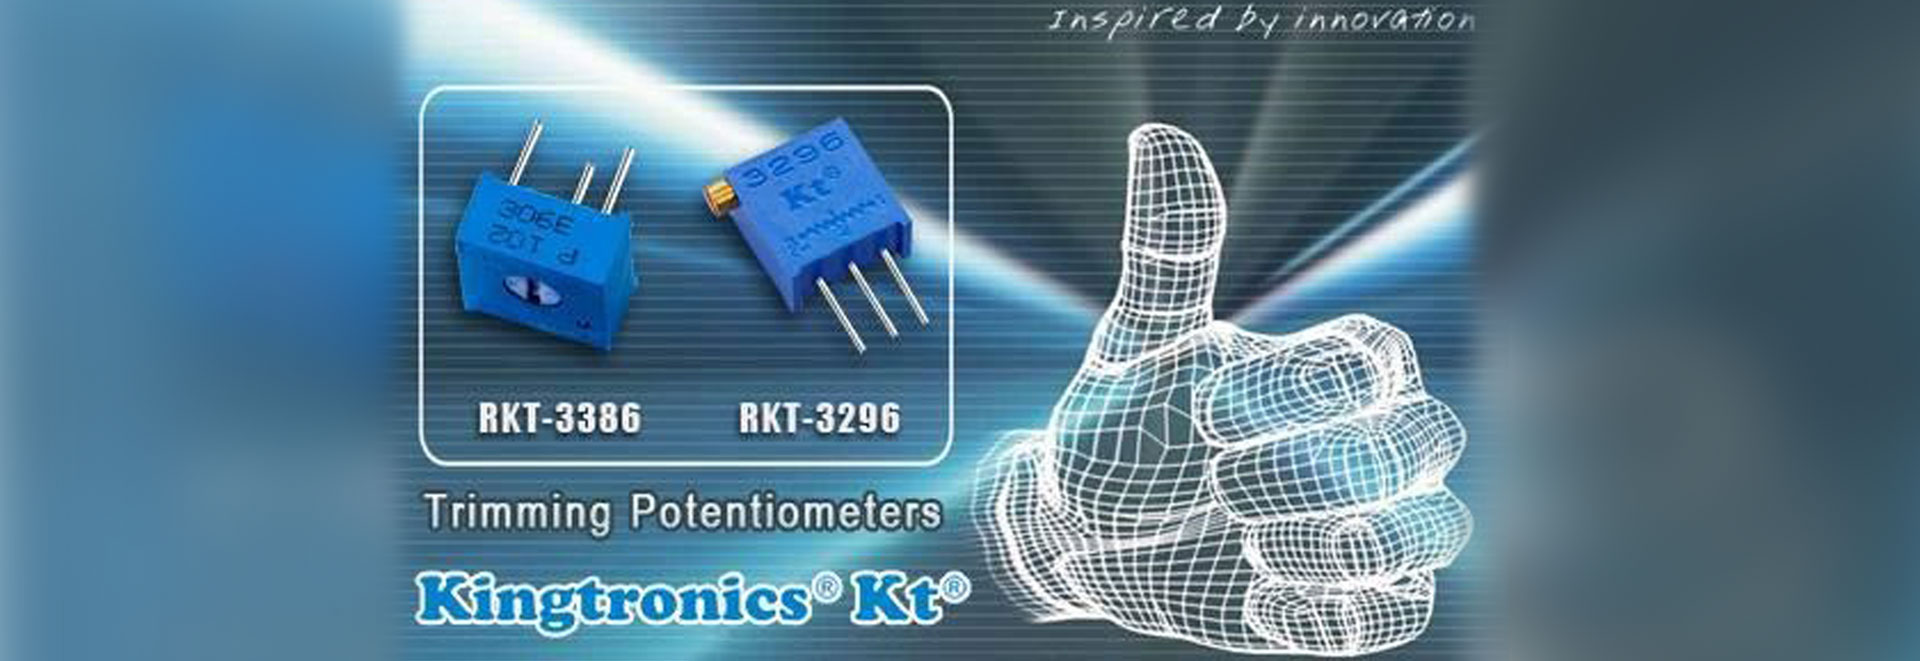 Inspired by Innovation, Trimming Potentiometers, Kingtronics KT